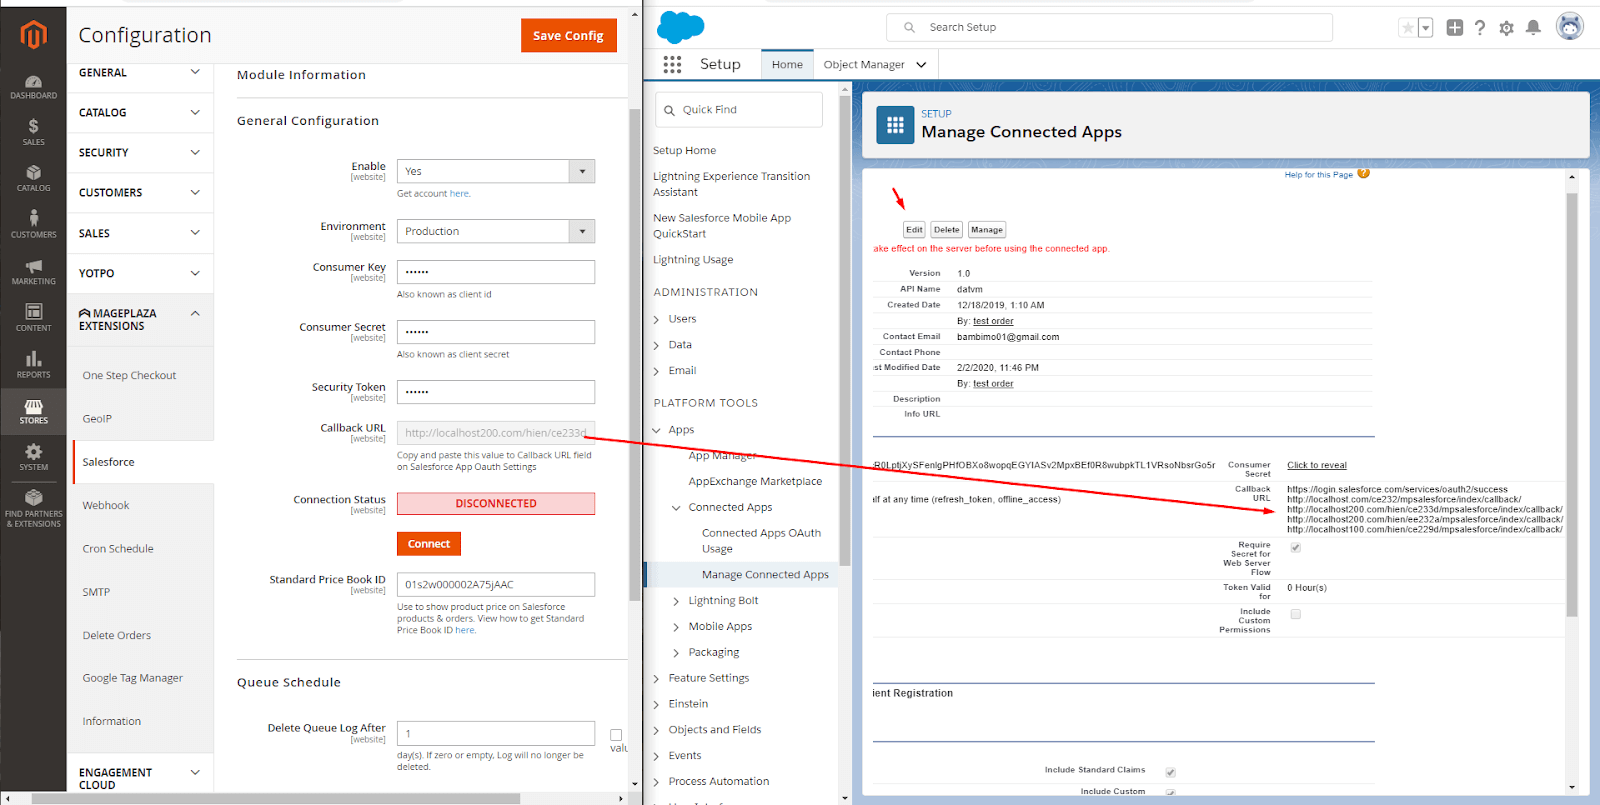 Copy and paste the value to the Callback URL field in Salesforce